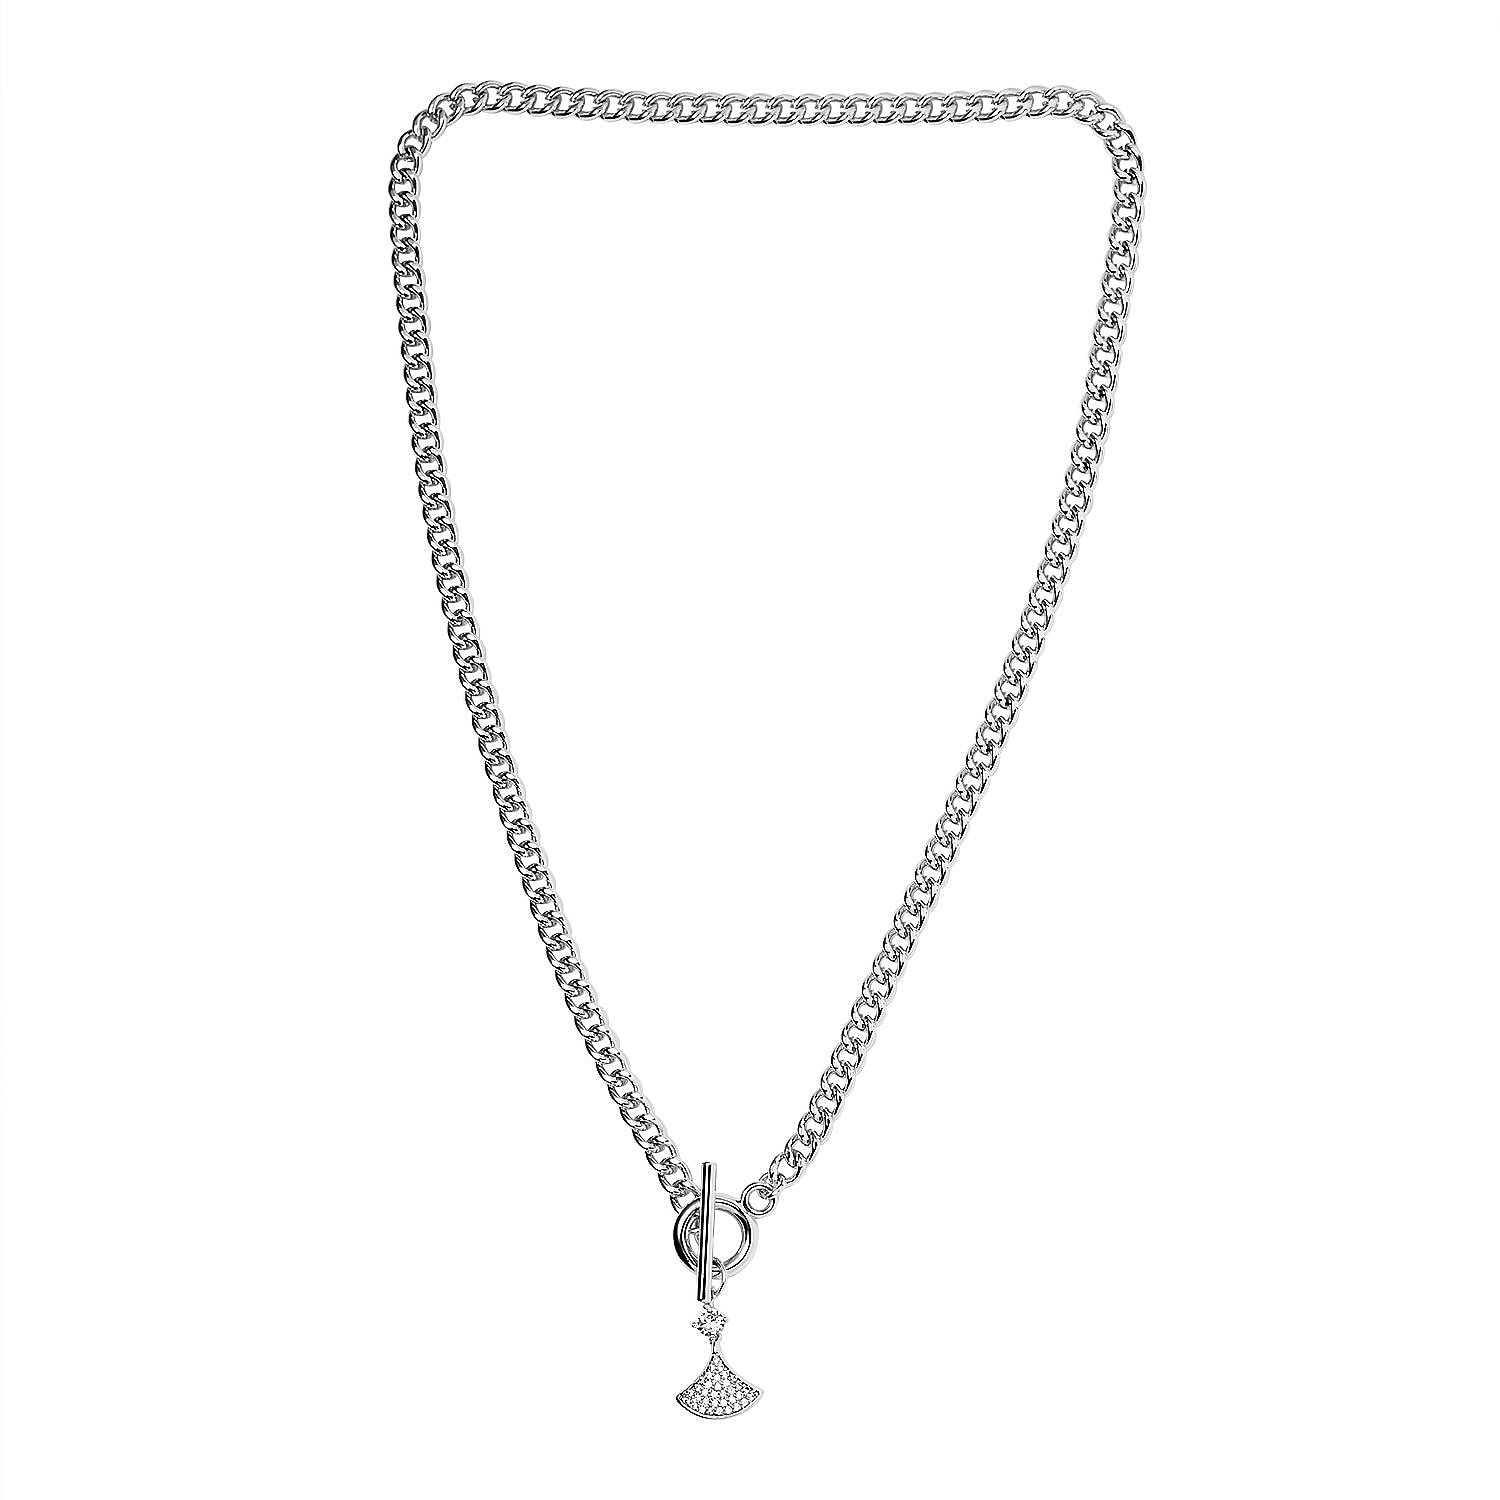 Cubic Zirconia Triangle Necklace (Size - 20) with T-Bar Clasp in Silver Tone